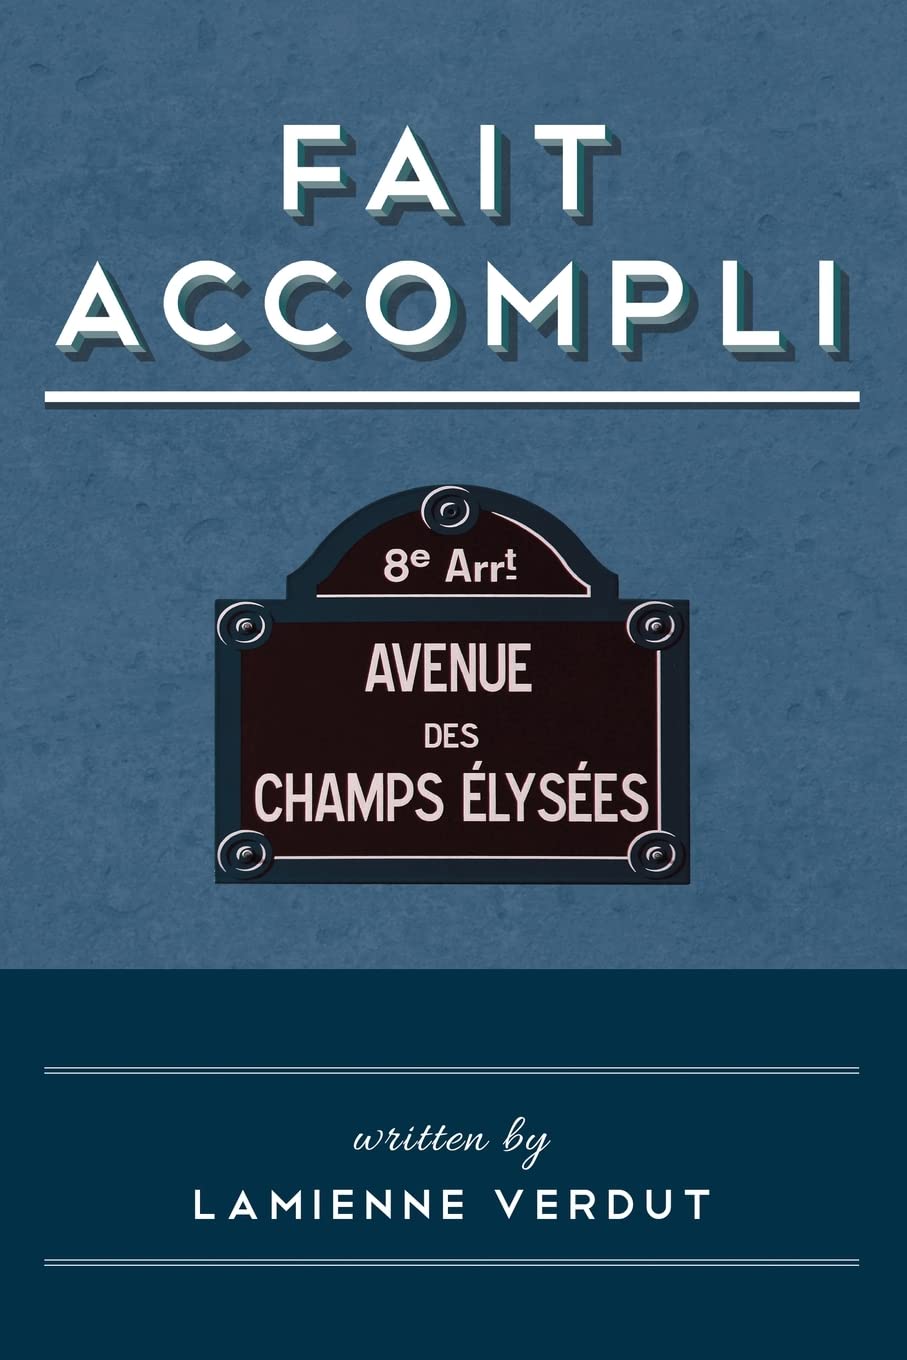 New novel "Fait Accompli" by Lamienne Verdut is released, a harrowing story of emotional pain, indulgence, and processing trauma based on the author’s real experiences